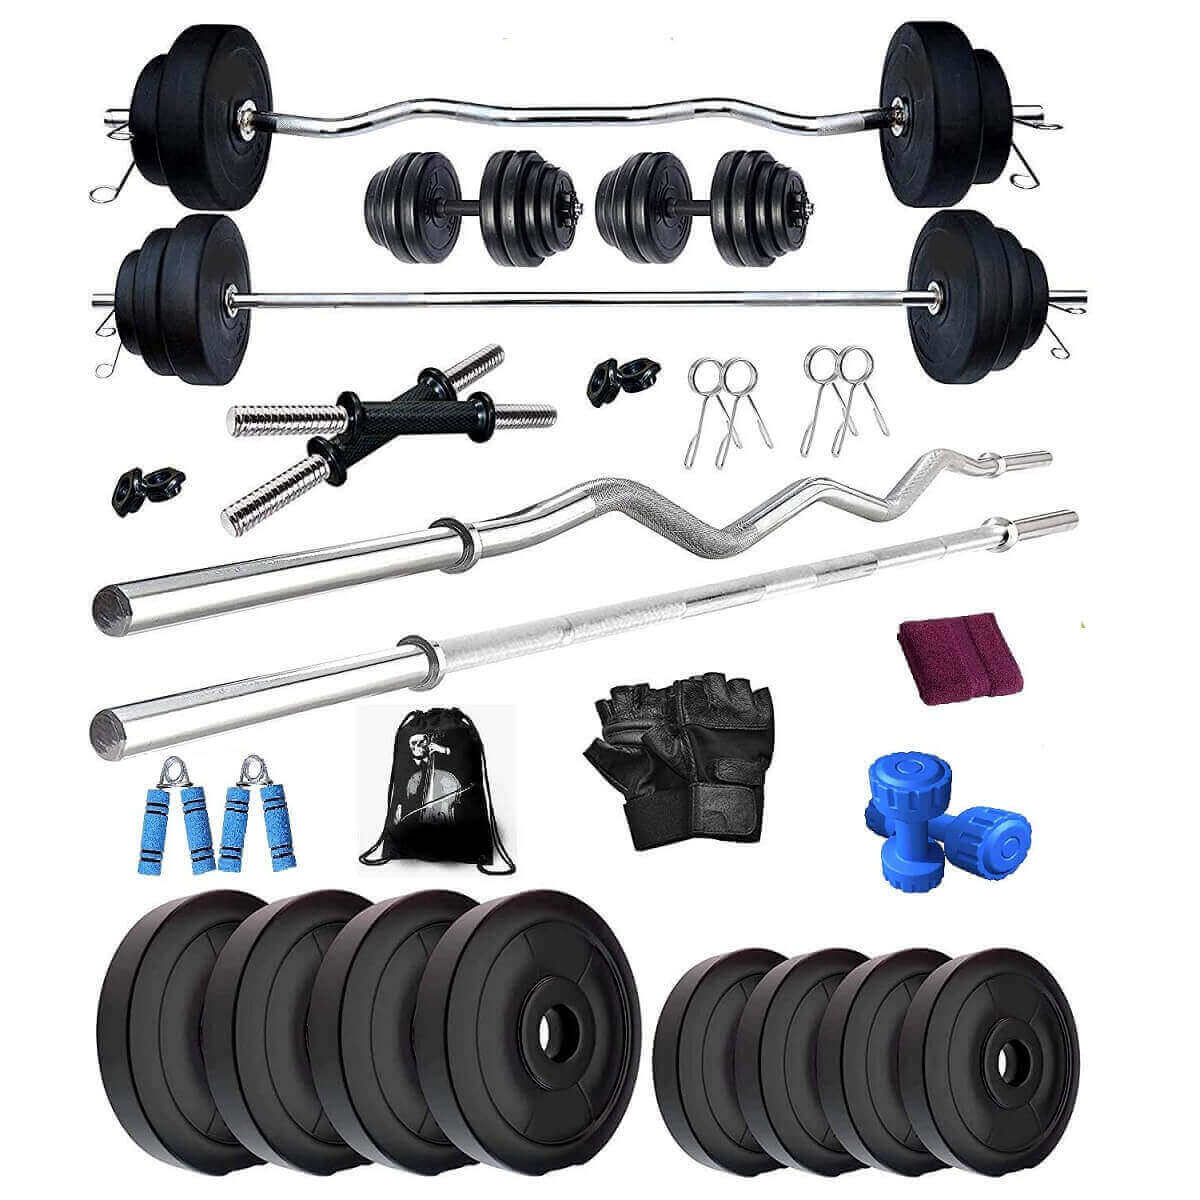 Bodyfit Home Gym Combo, Home Gym Set, Gym Equipment (10 kg) – Sports Wing